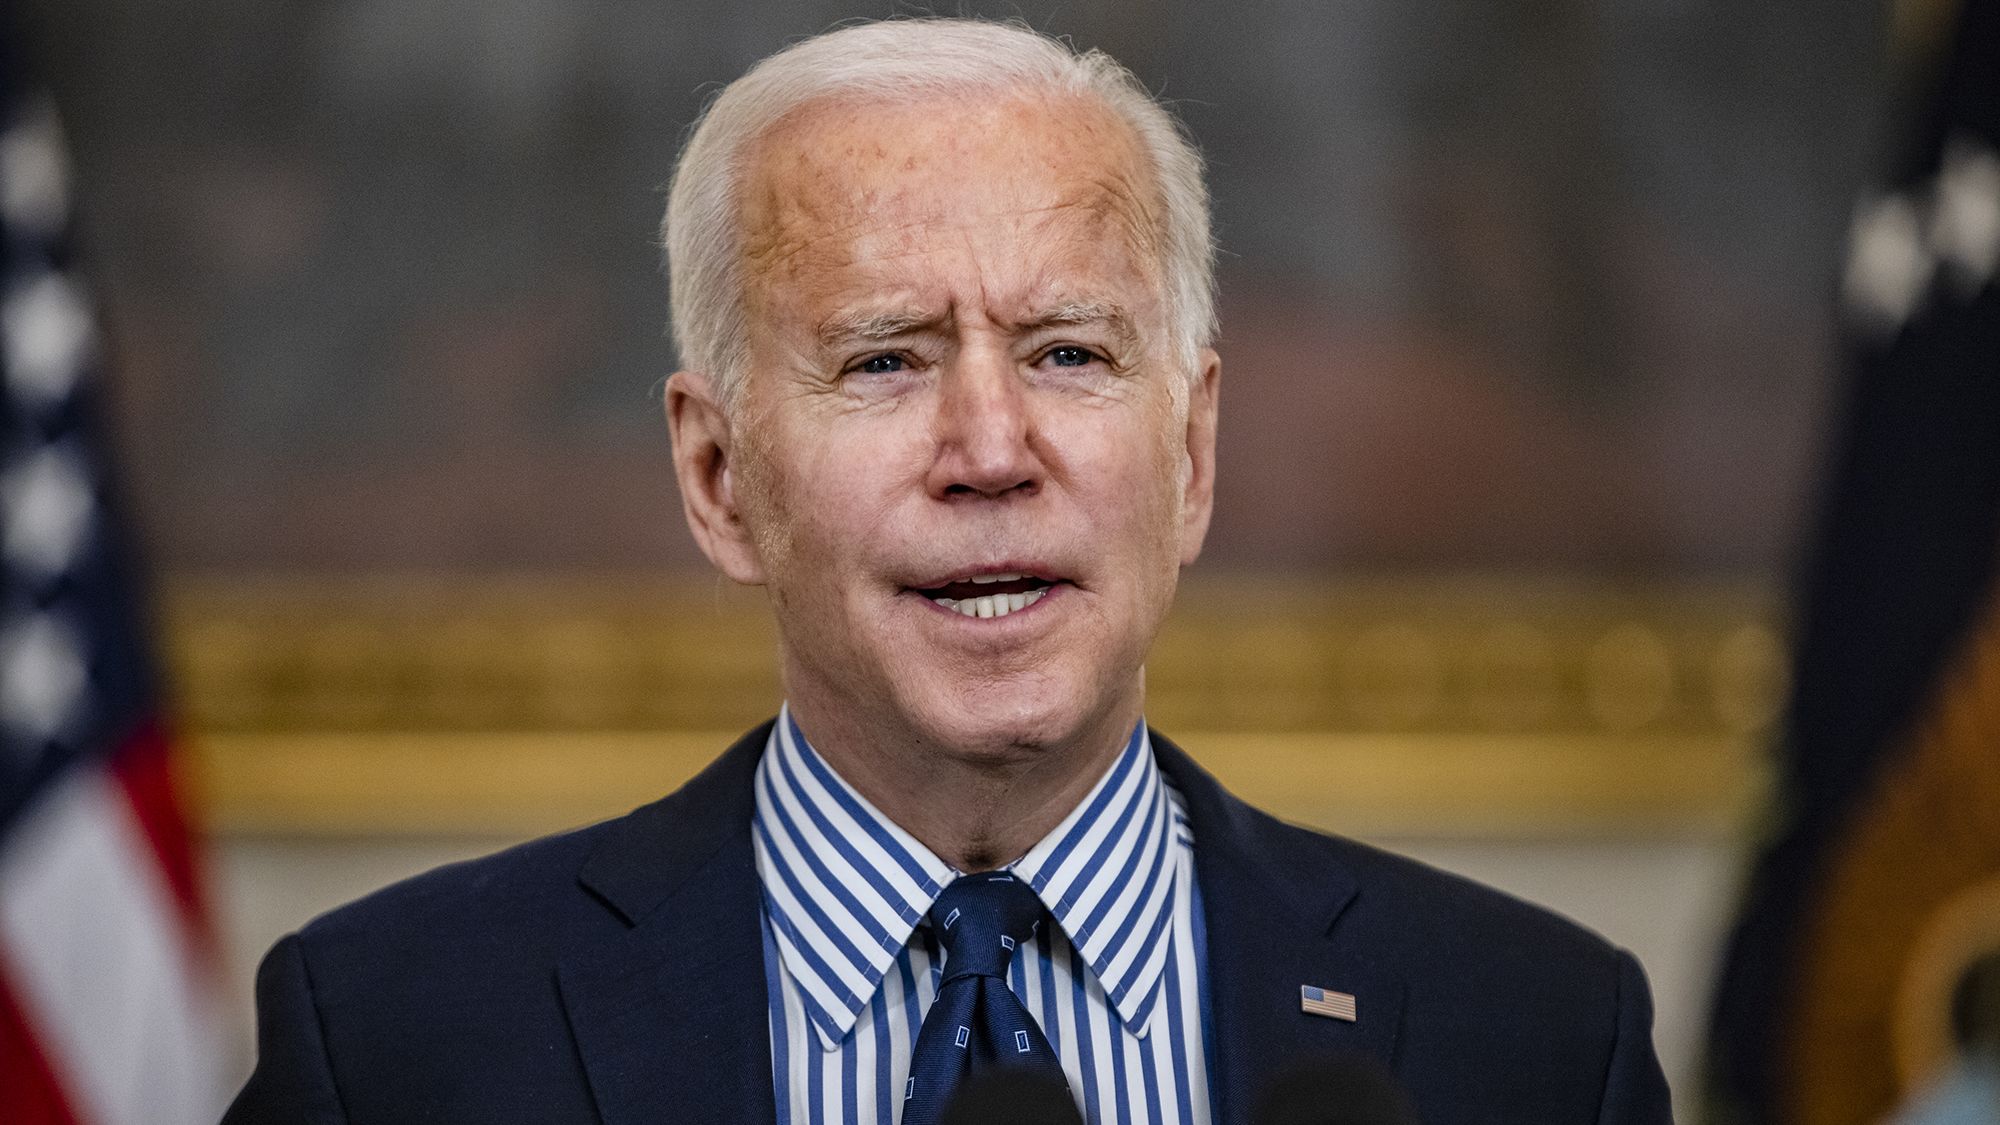 Biden signs executive orders establishing Gender Policy Council and sexual violence in education | CNN Politics